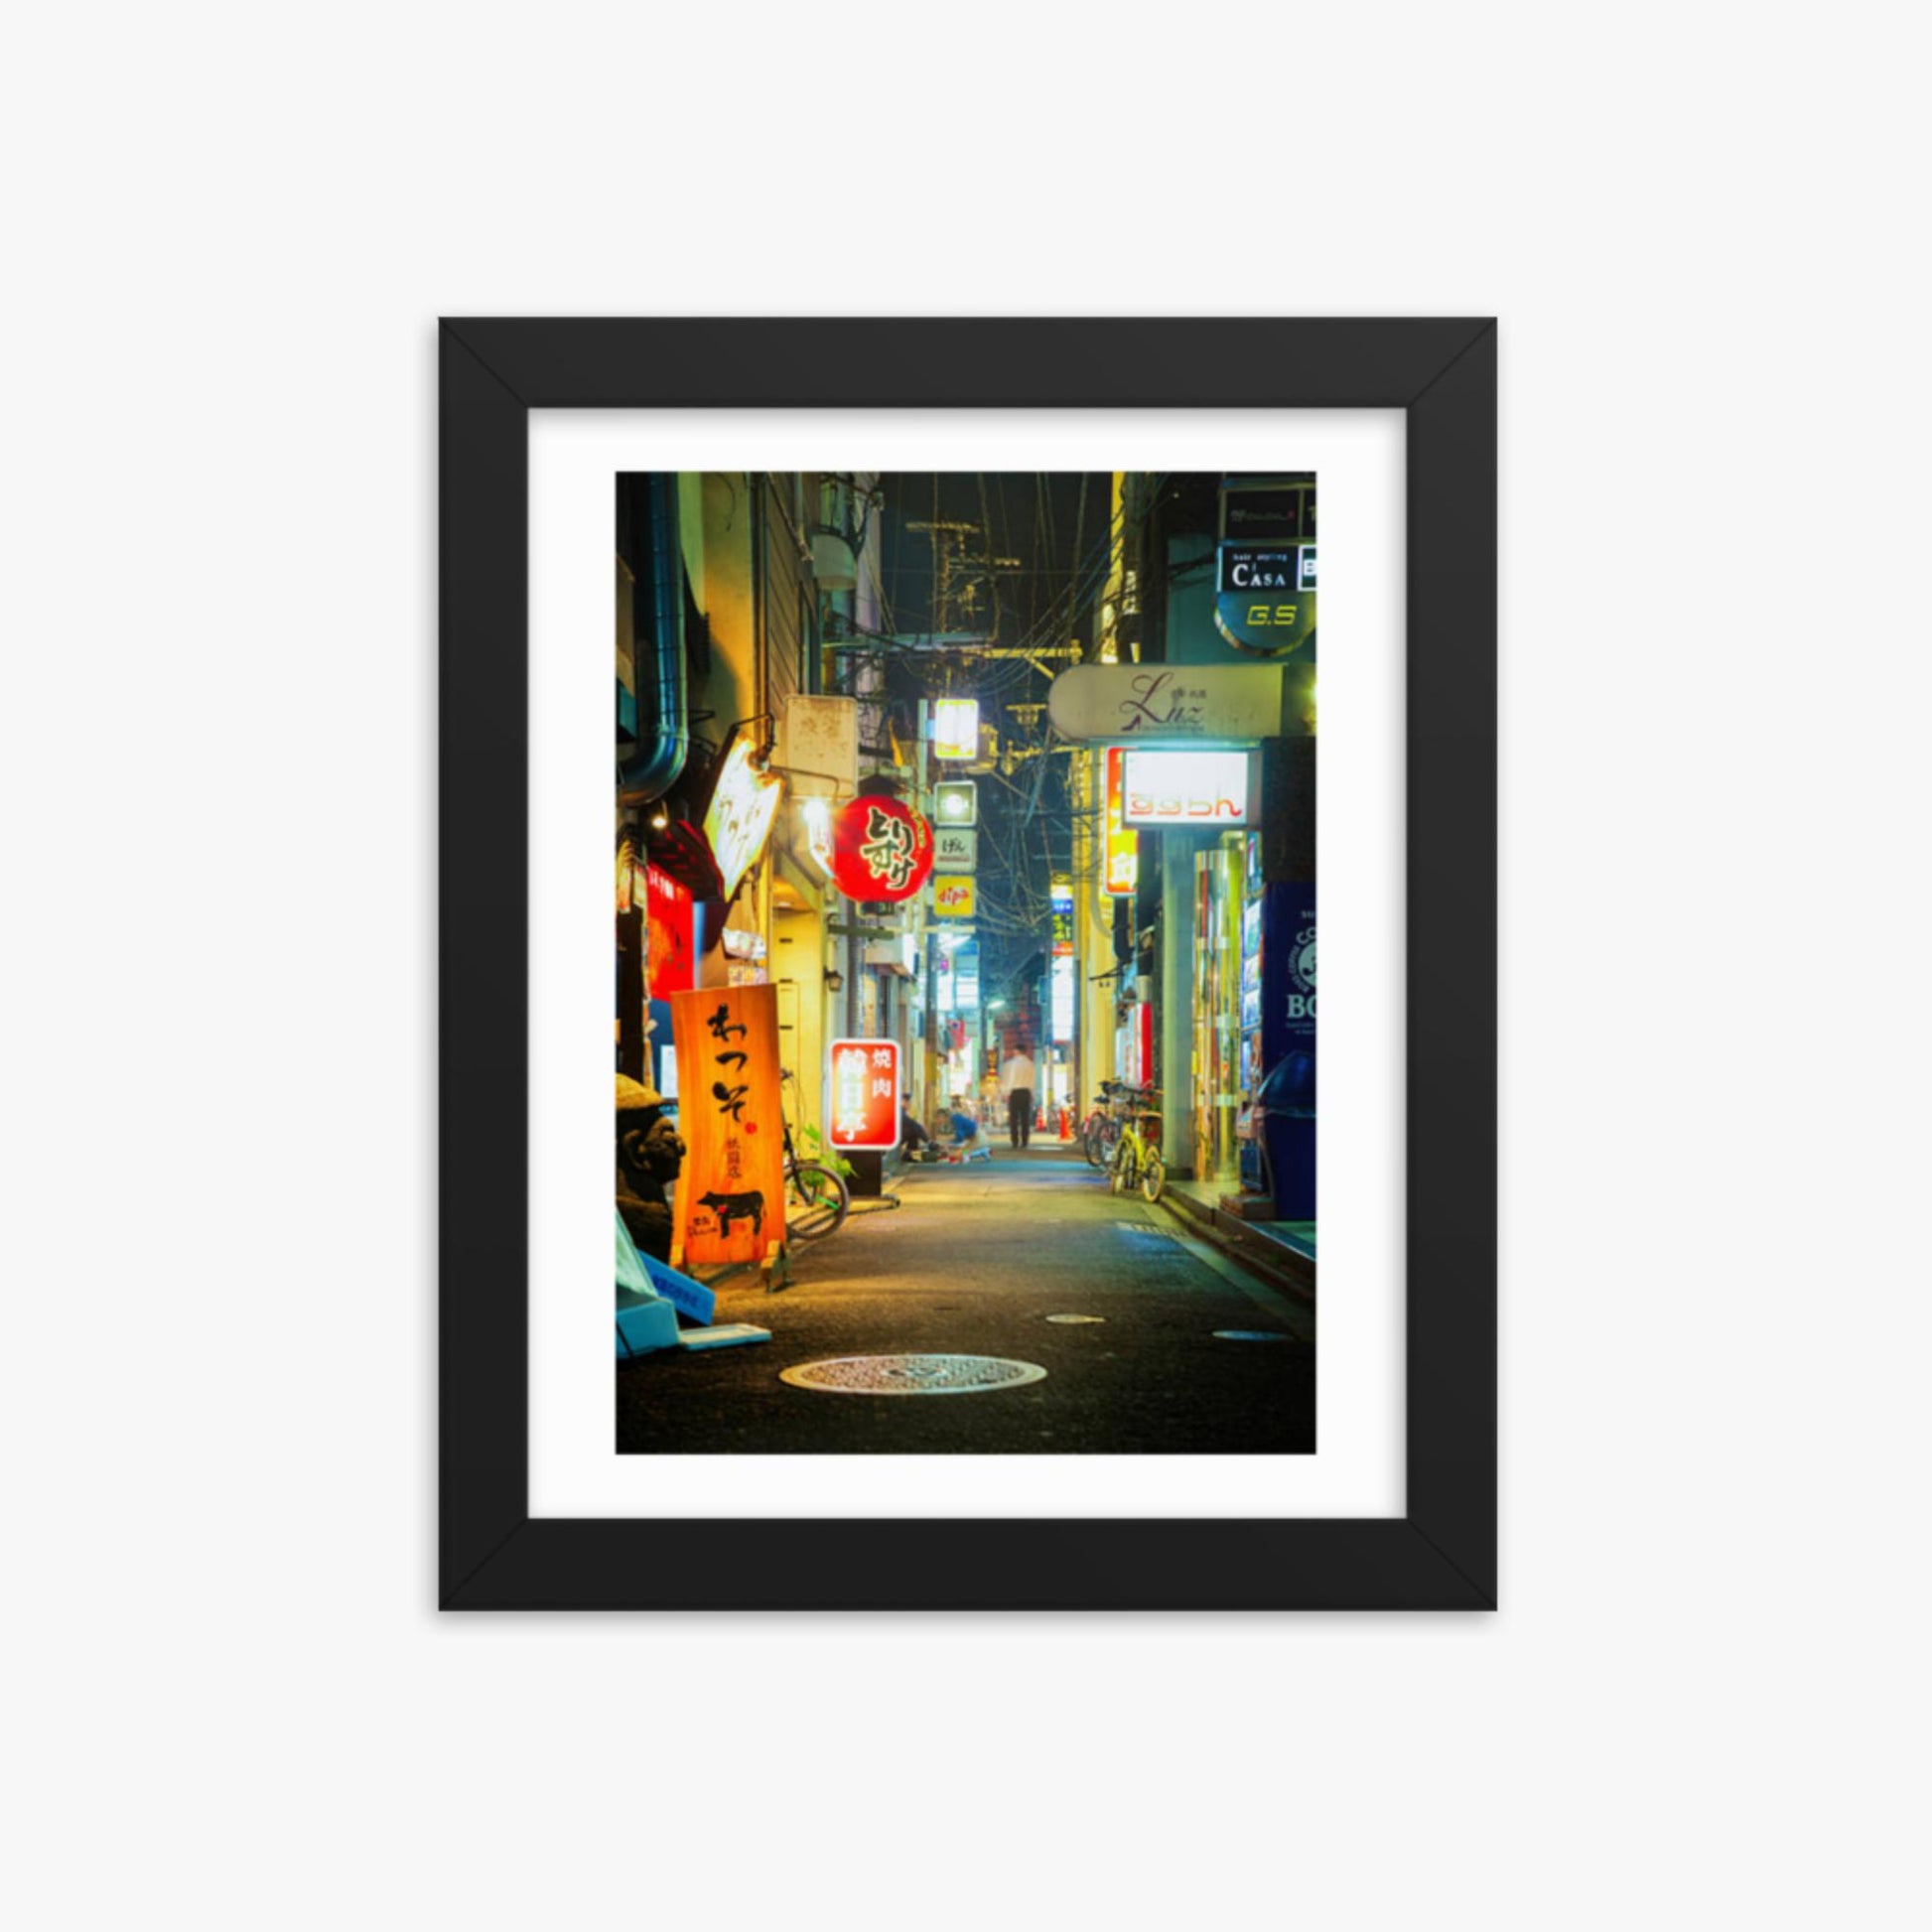 Kyoto, Japan backstreet at night 8x10 in Poster With Black Frame